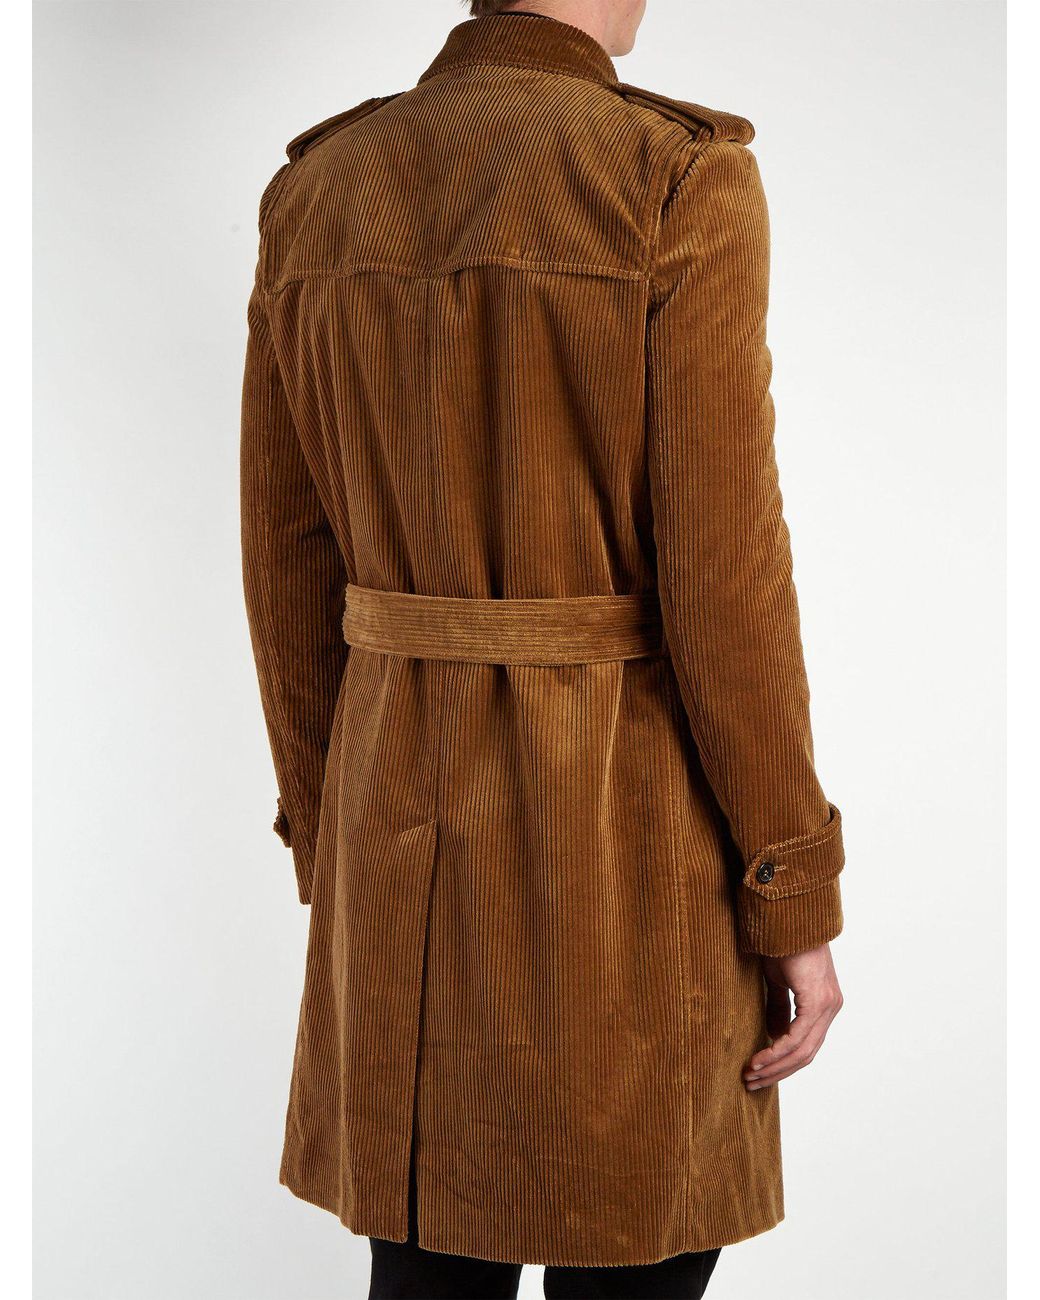 Saint Laurent Double Breasted Corduroy Trench Coat in Brown for Men | Lyst